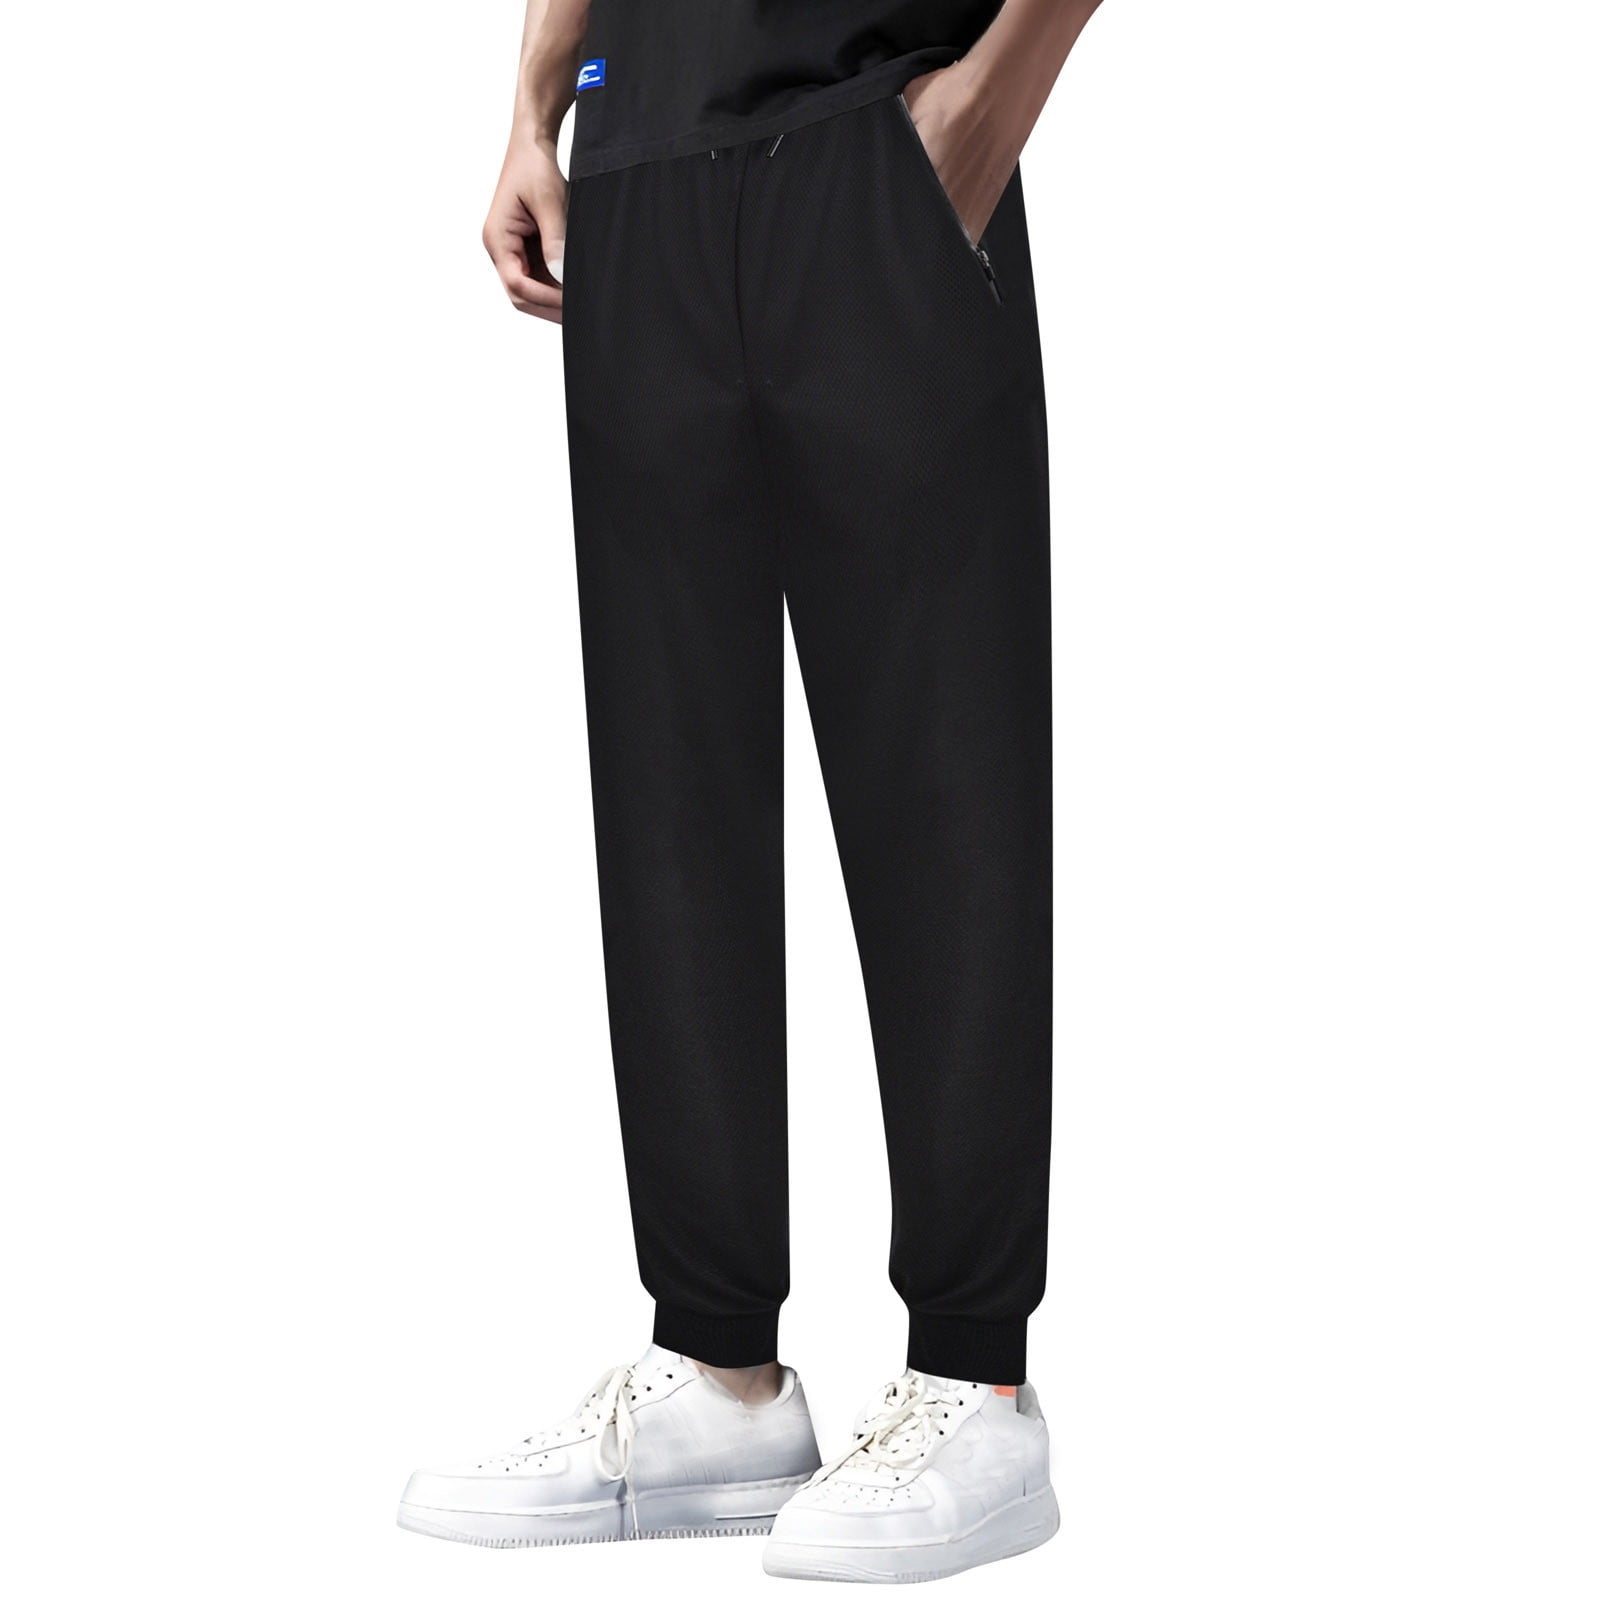 JHLZHS Baggy Gym Sweatpants For Men Pants With Zipper Pockets Mesh ...